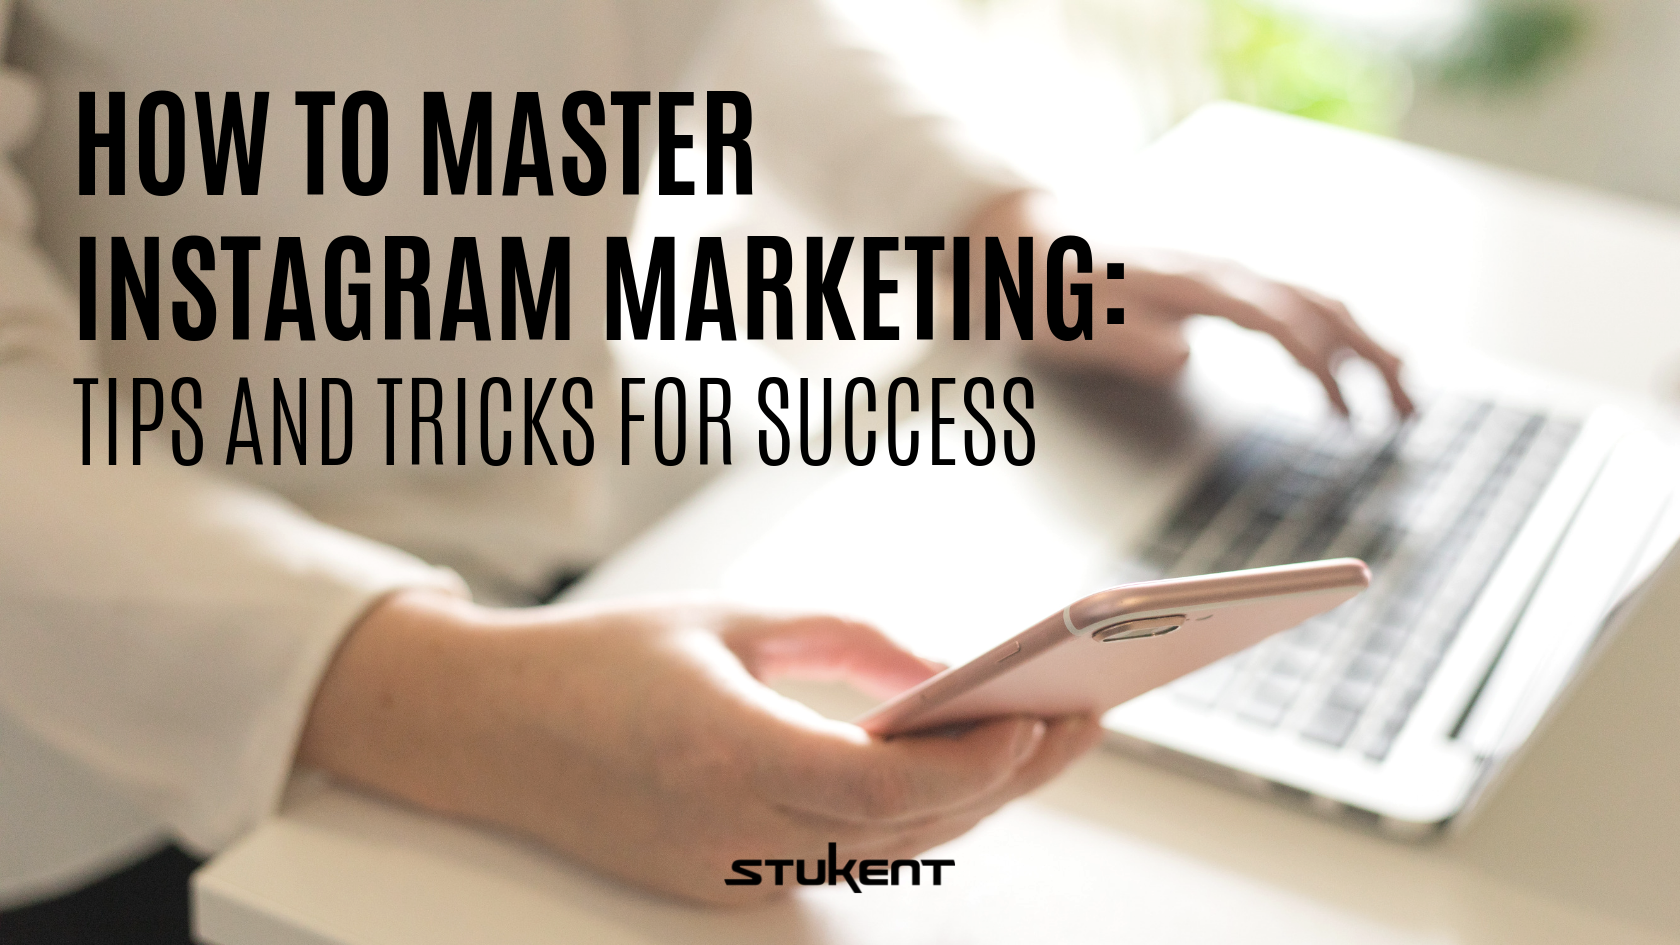 How to Master Instagram Marketing: Tips and Tricks for Success